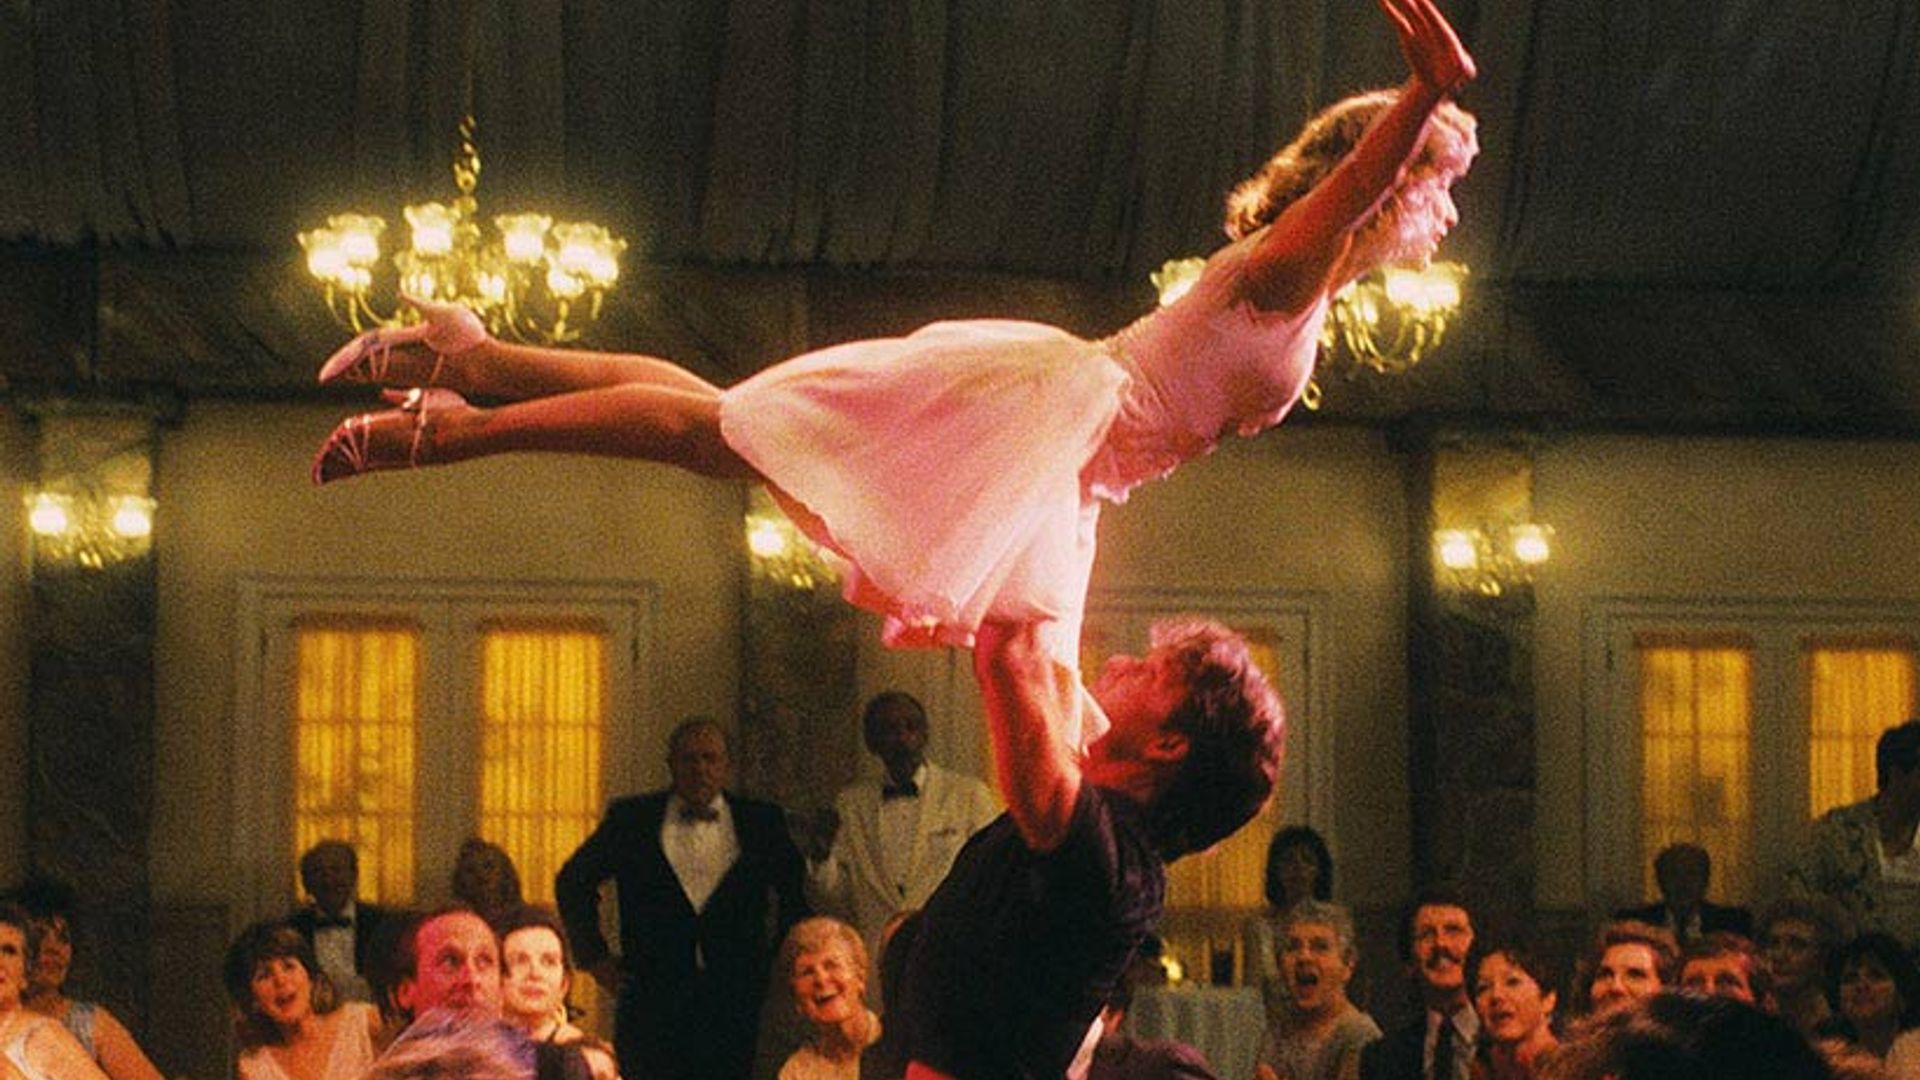 You can have the time of your life this summer at the real Dirty Dancing resort